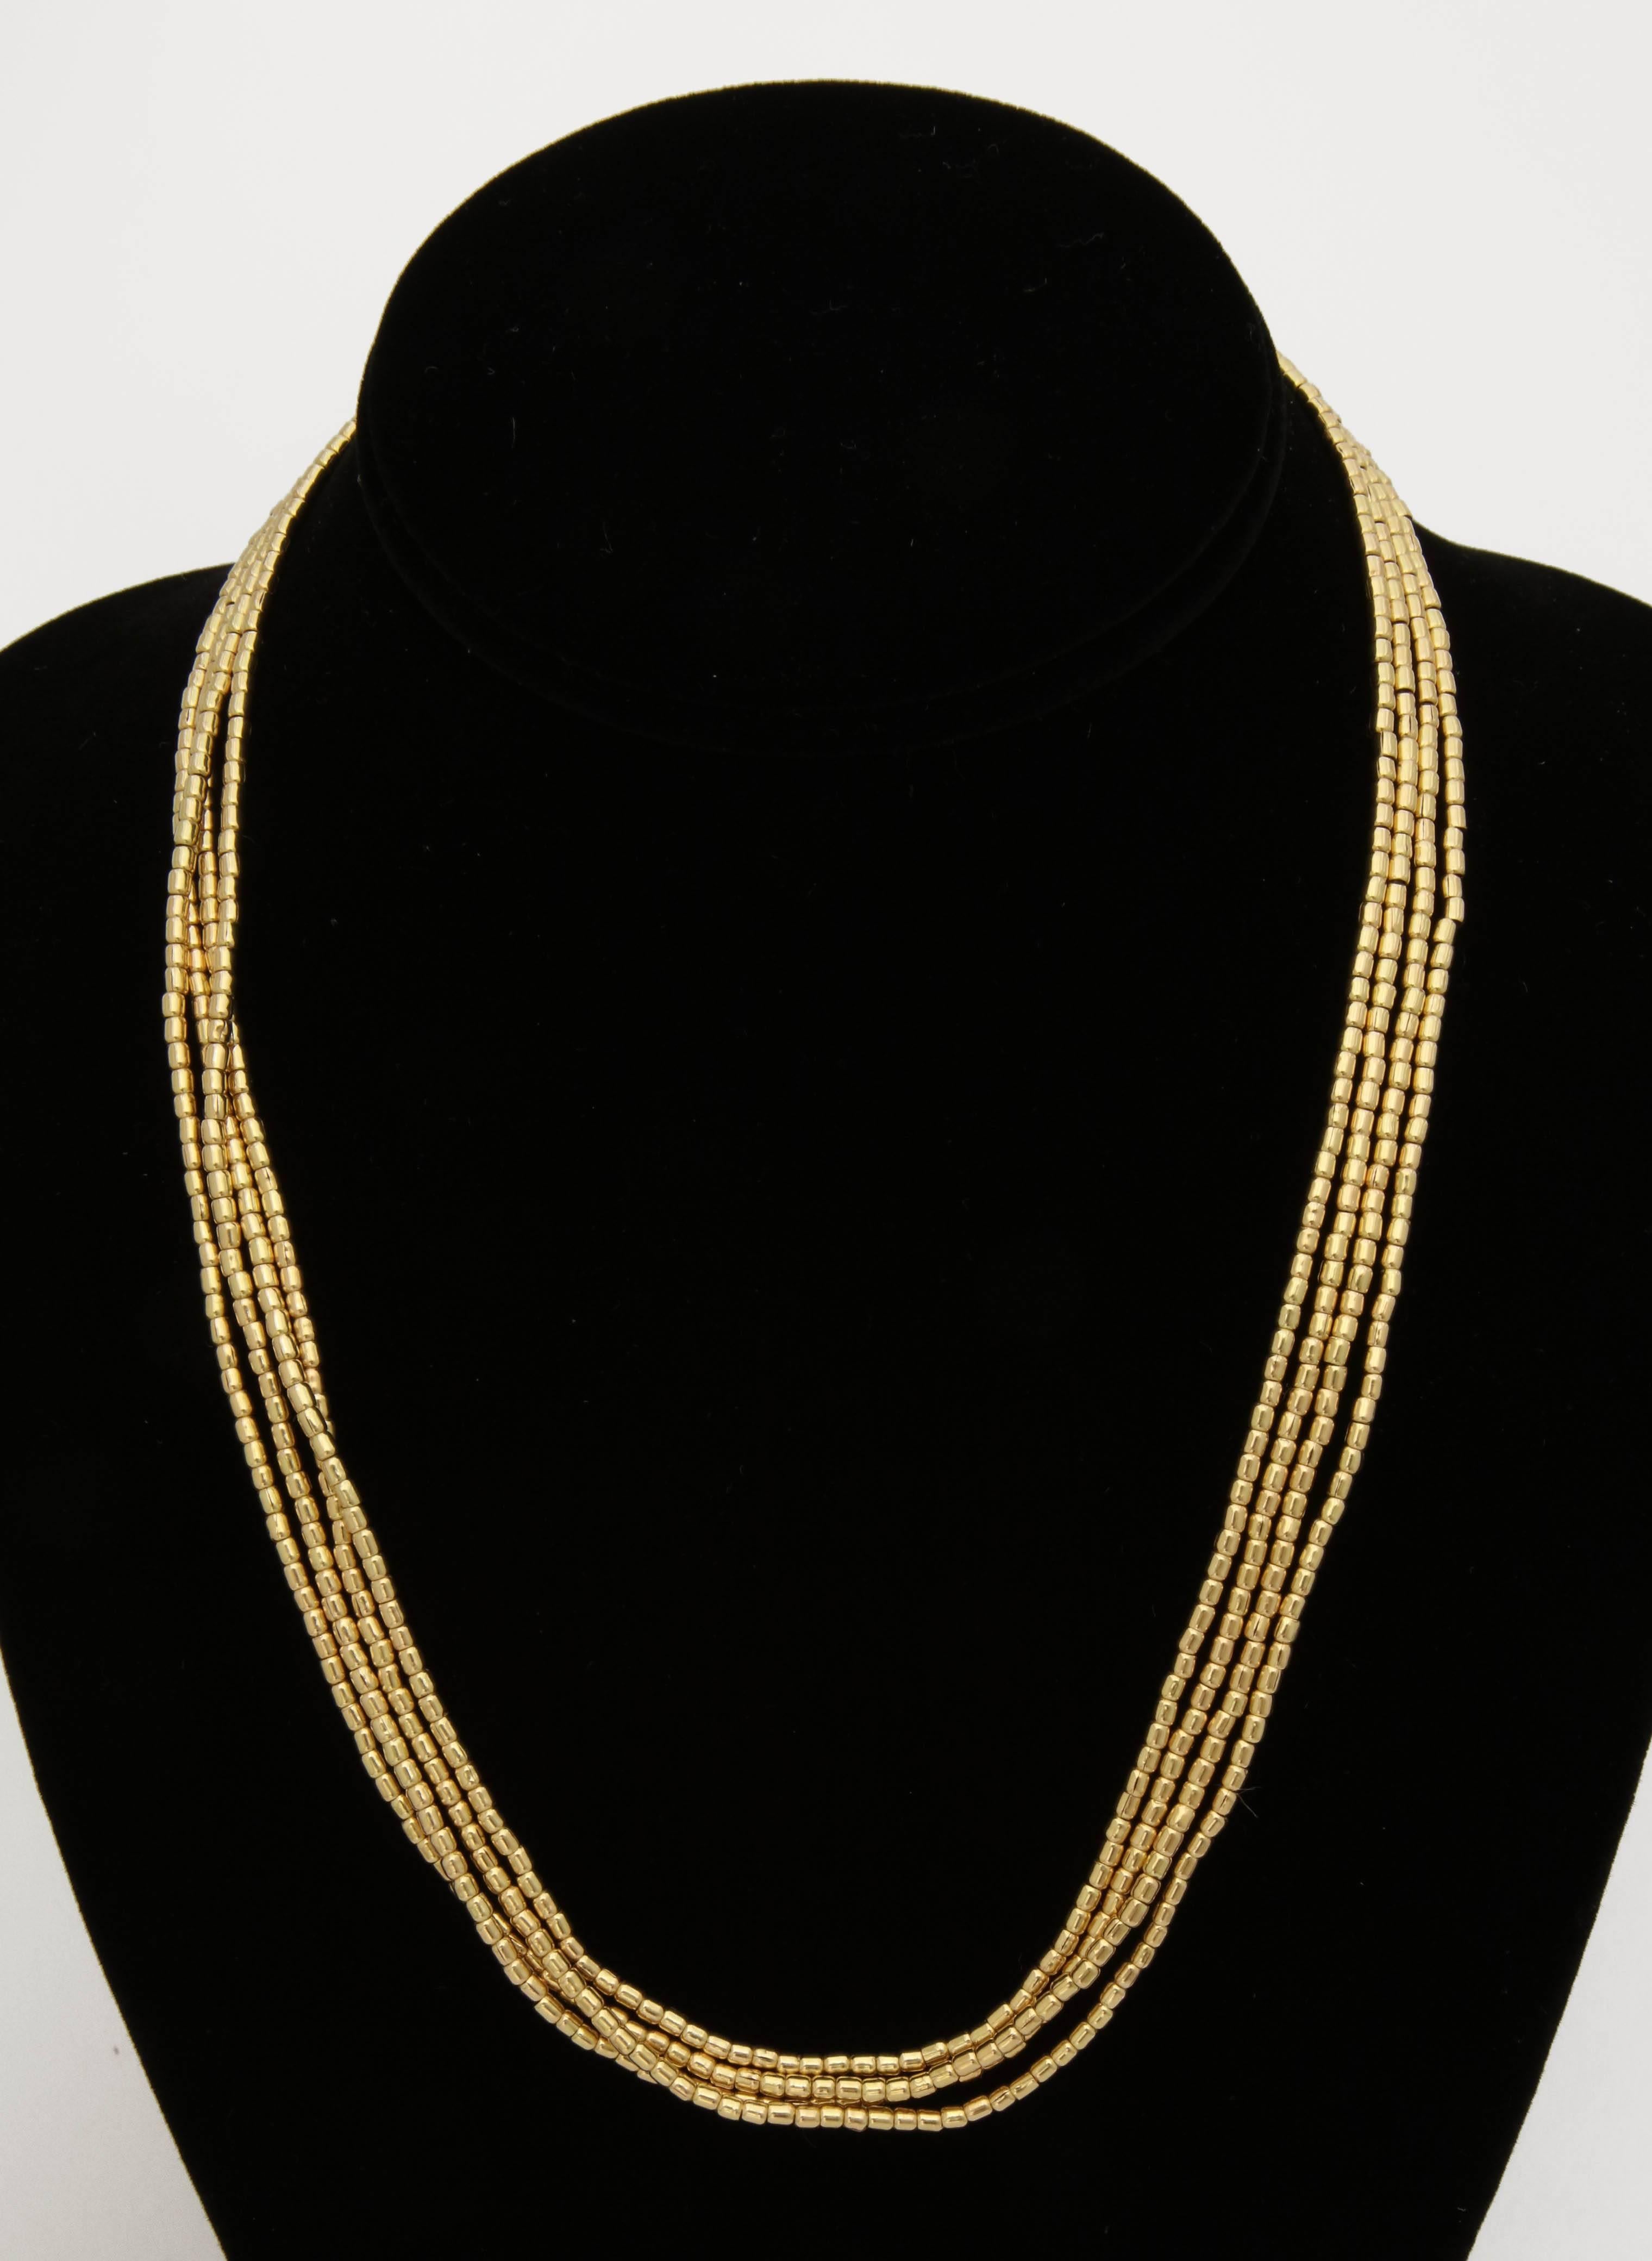 One Unisex Long Lariat Stlye Chain Necklace Composed Of Numerous 18kt Yellow Gold Pellet Beads. May Be Wrapped around Your Neck Four Times Or Six Times to Be Worn On Your Wrist. Strung On cord for Flexiblity And Exemplfying a Beautiful rich Color